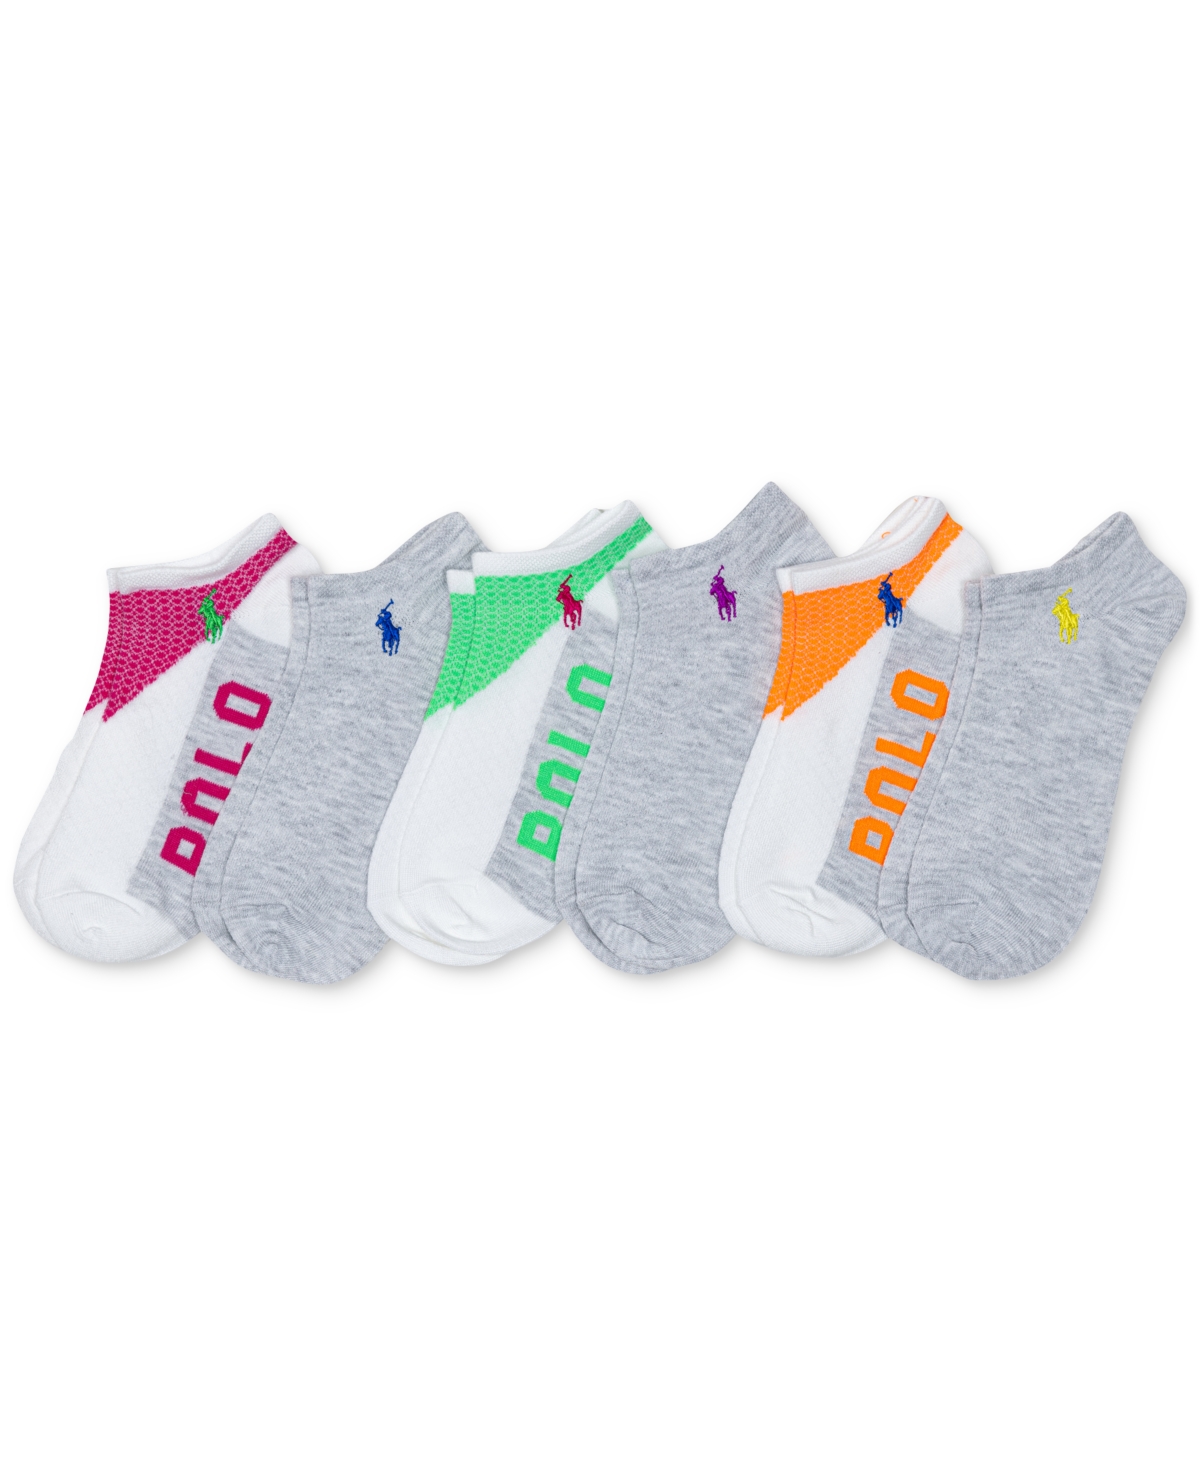 Polo Ralph Lauren 6 pack low cut trainer socks with cushion sole in white